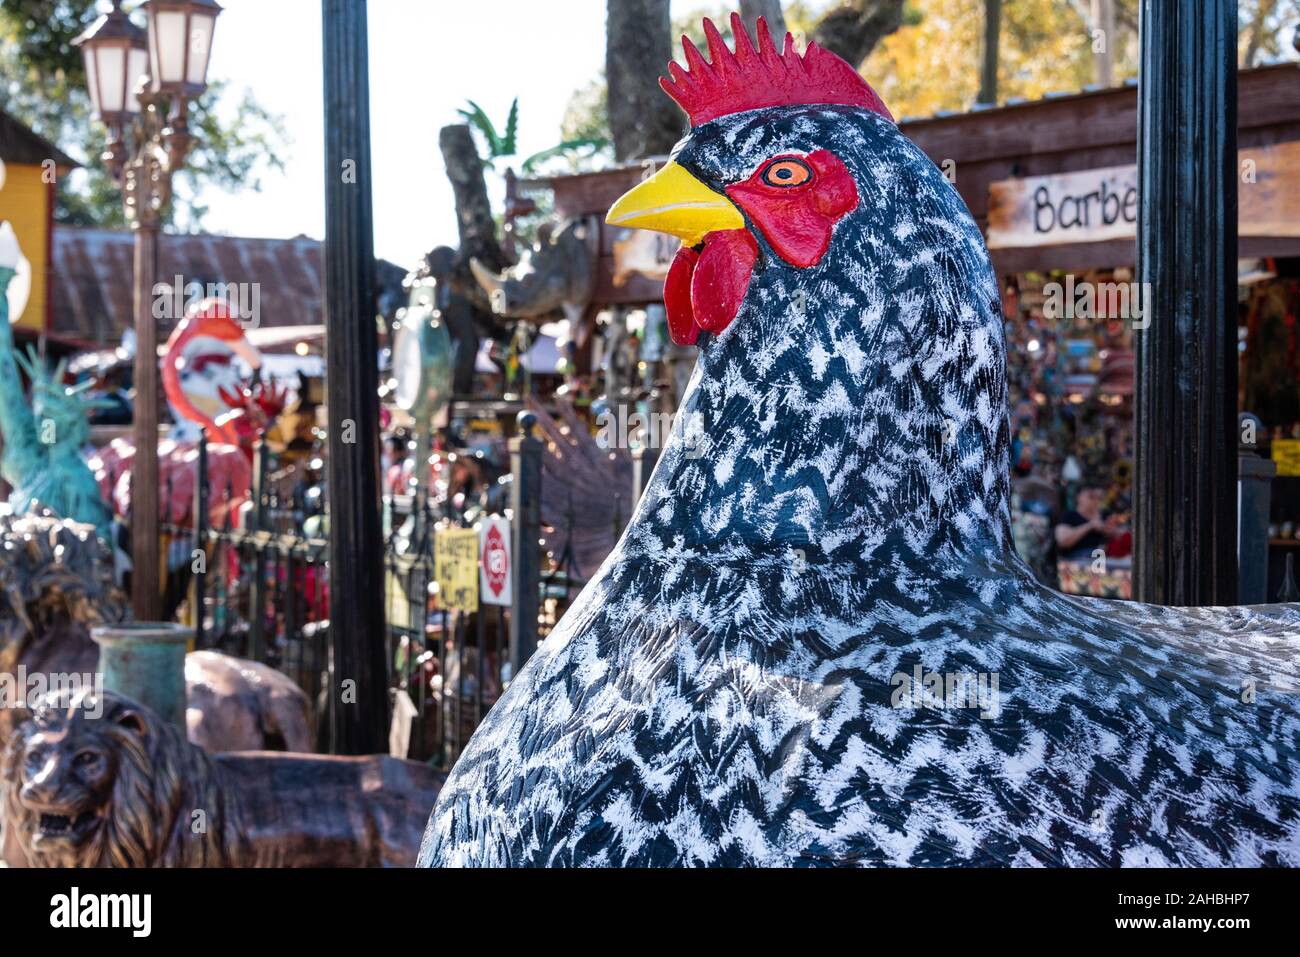 Giant painted chicken made of recycled cast aluminum at Barberville Roadside Yard Art Emporium in Pierson, Florida. (USA) Stock Photo